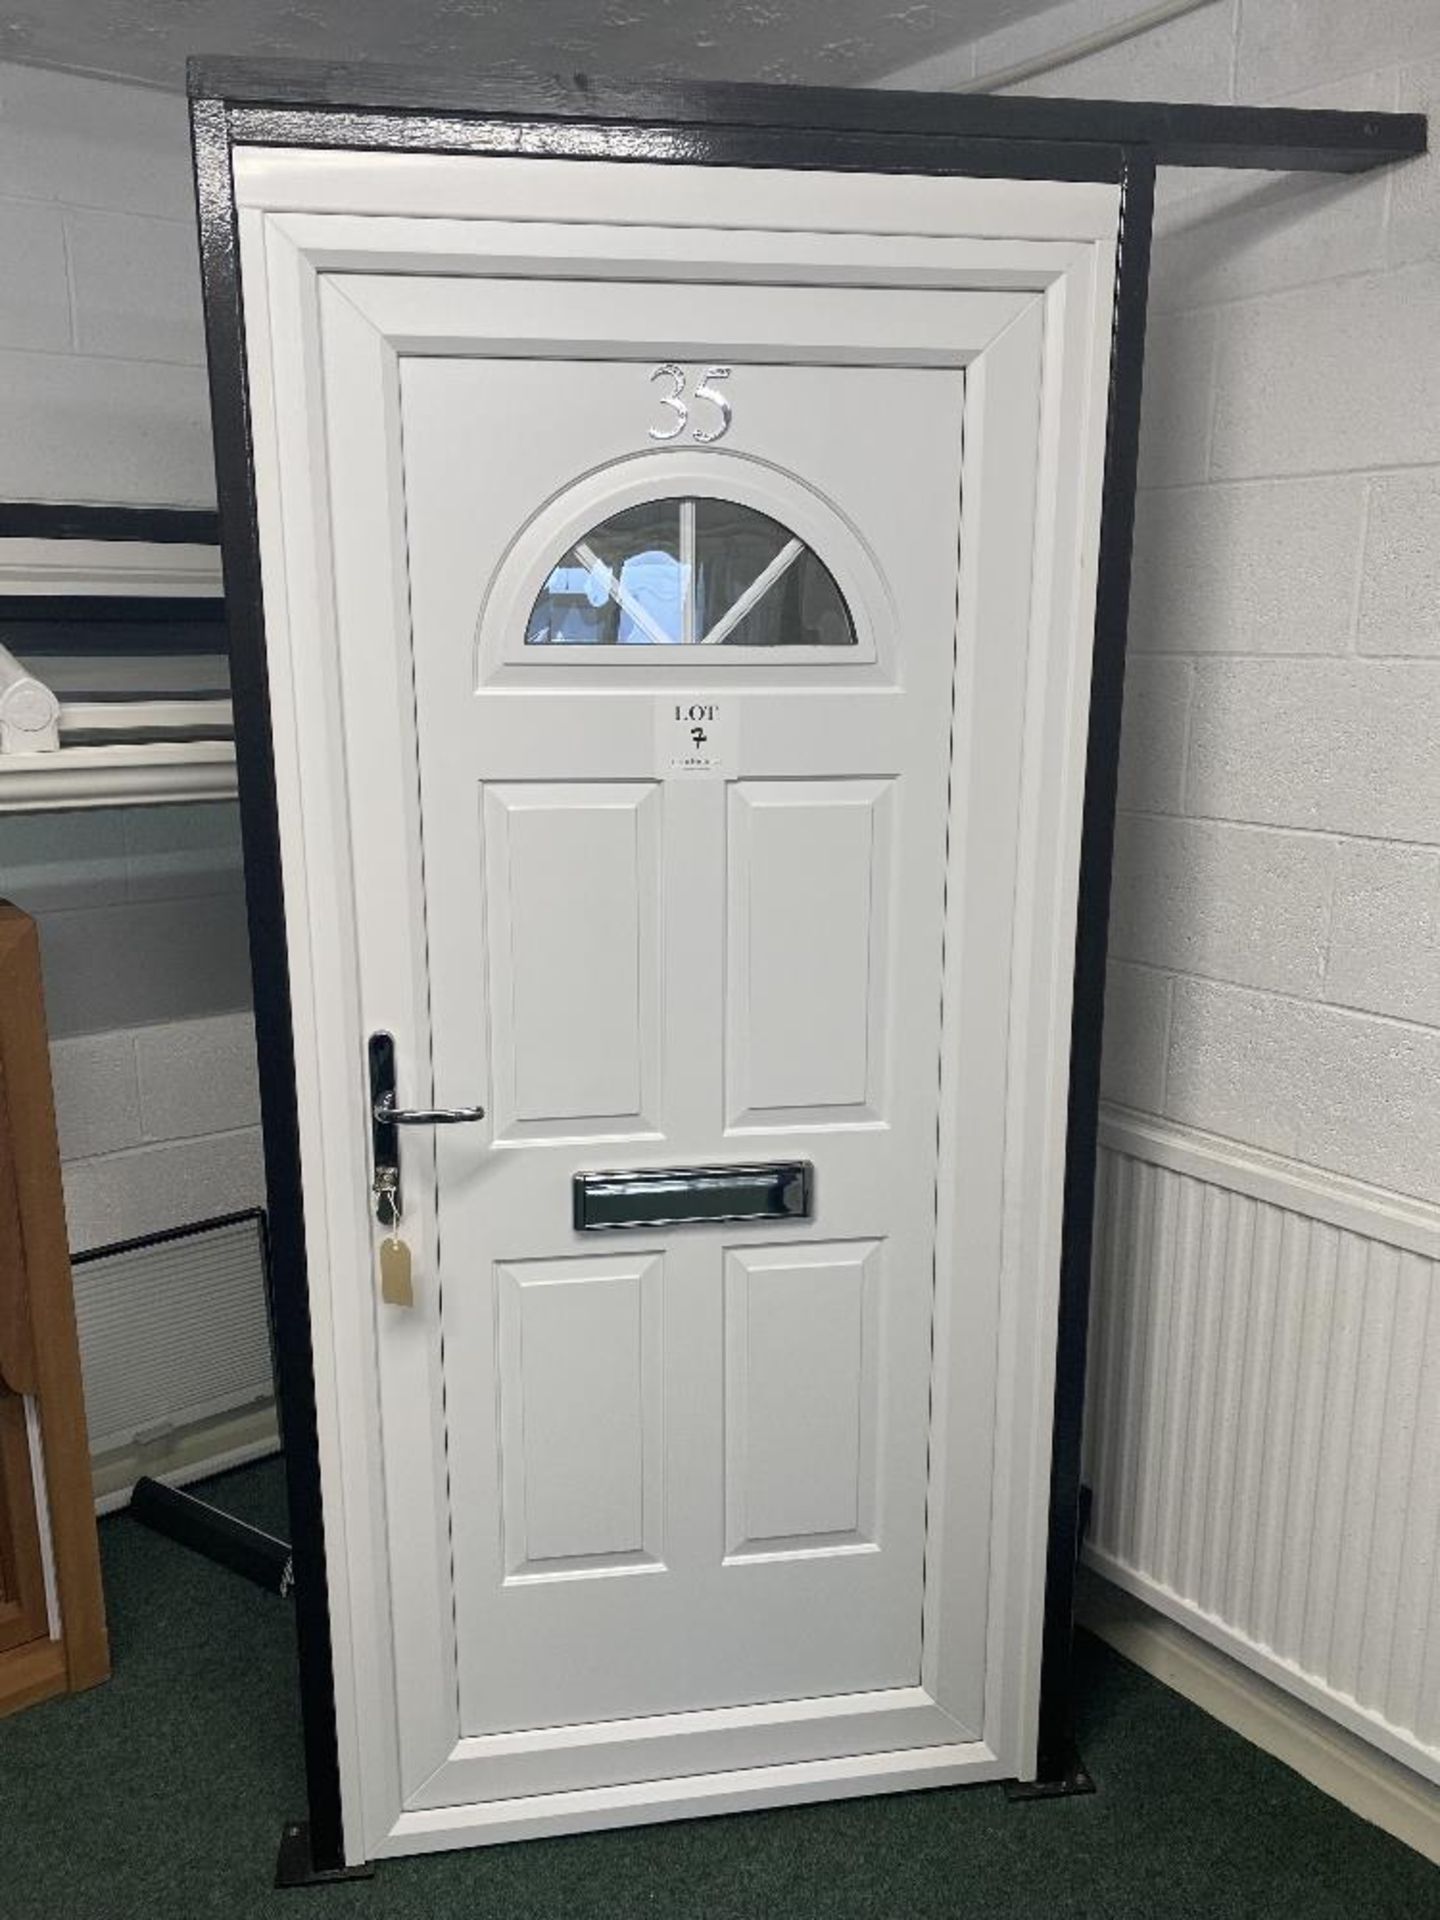 White upvc door and frame, with key, approximate size 206cm high x 94cm wide